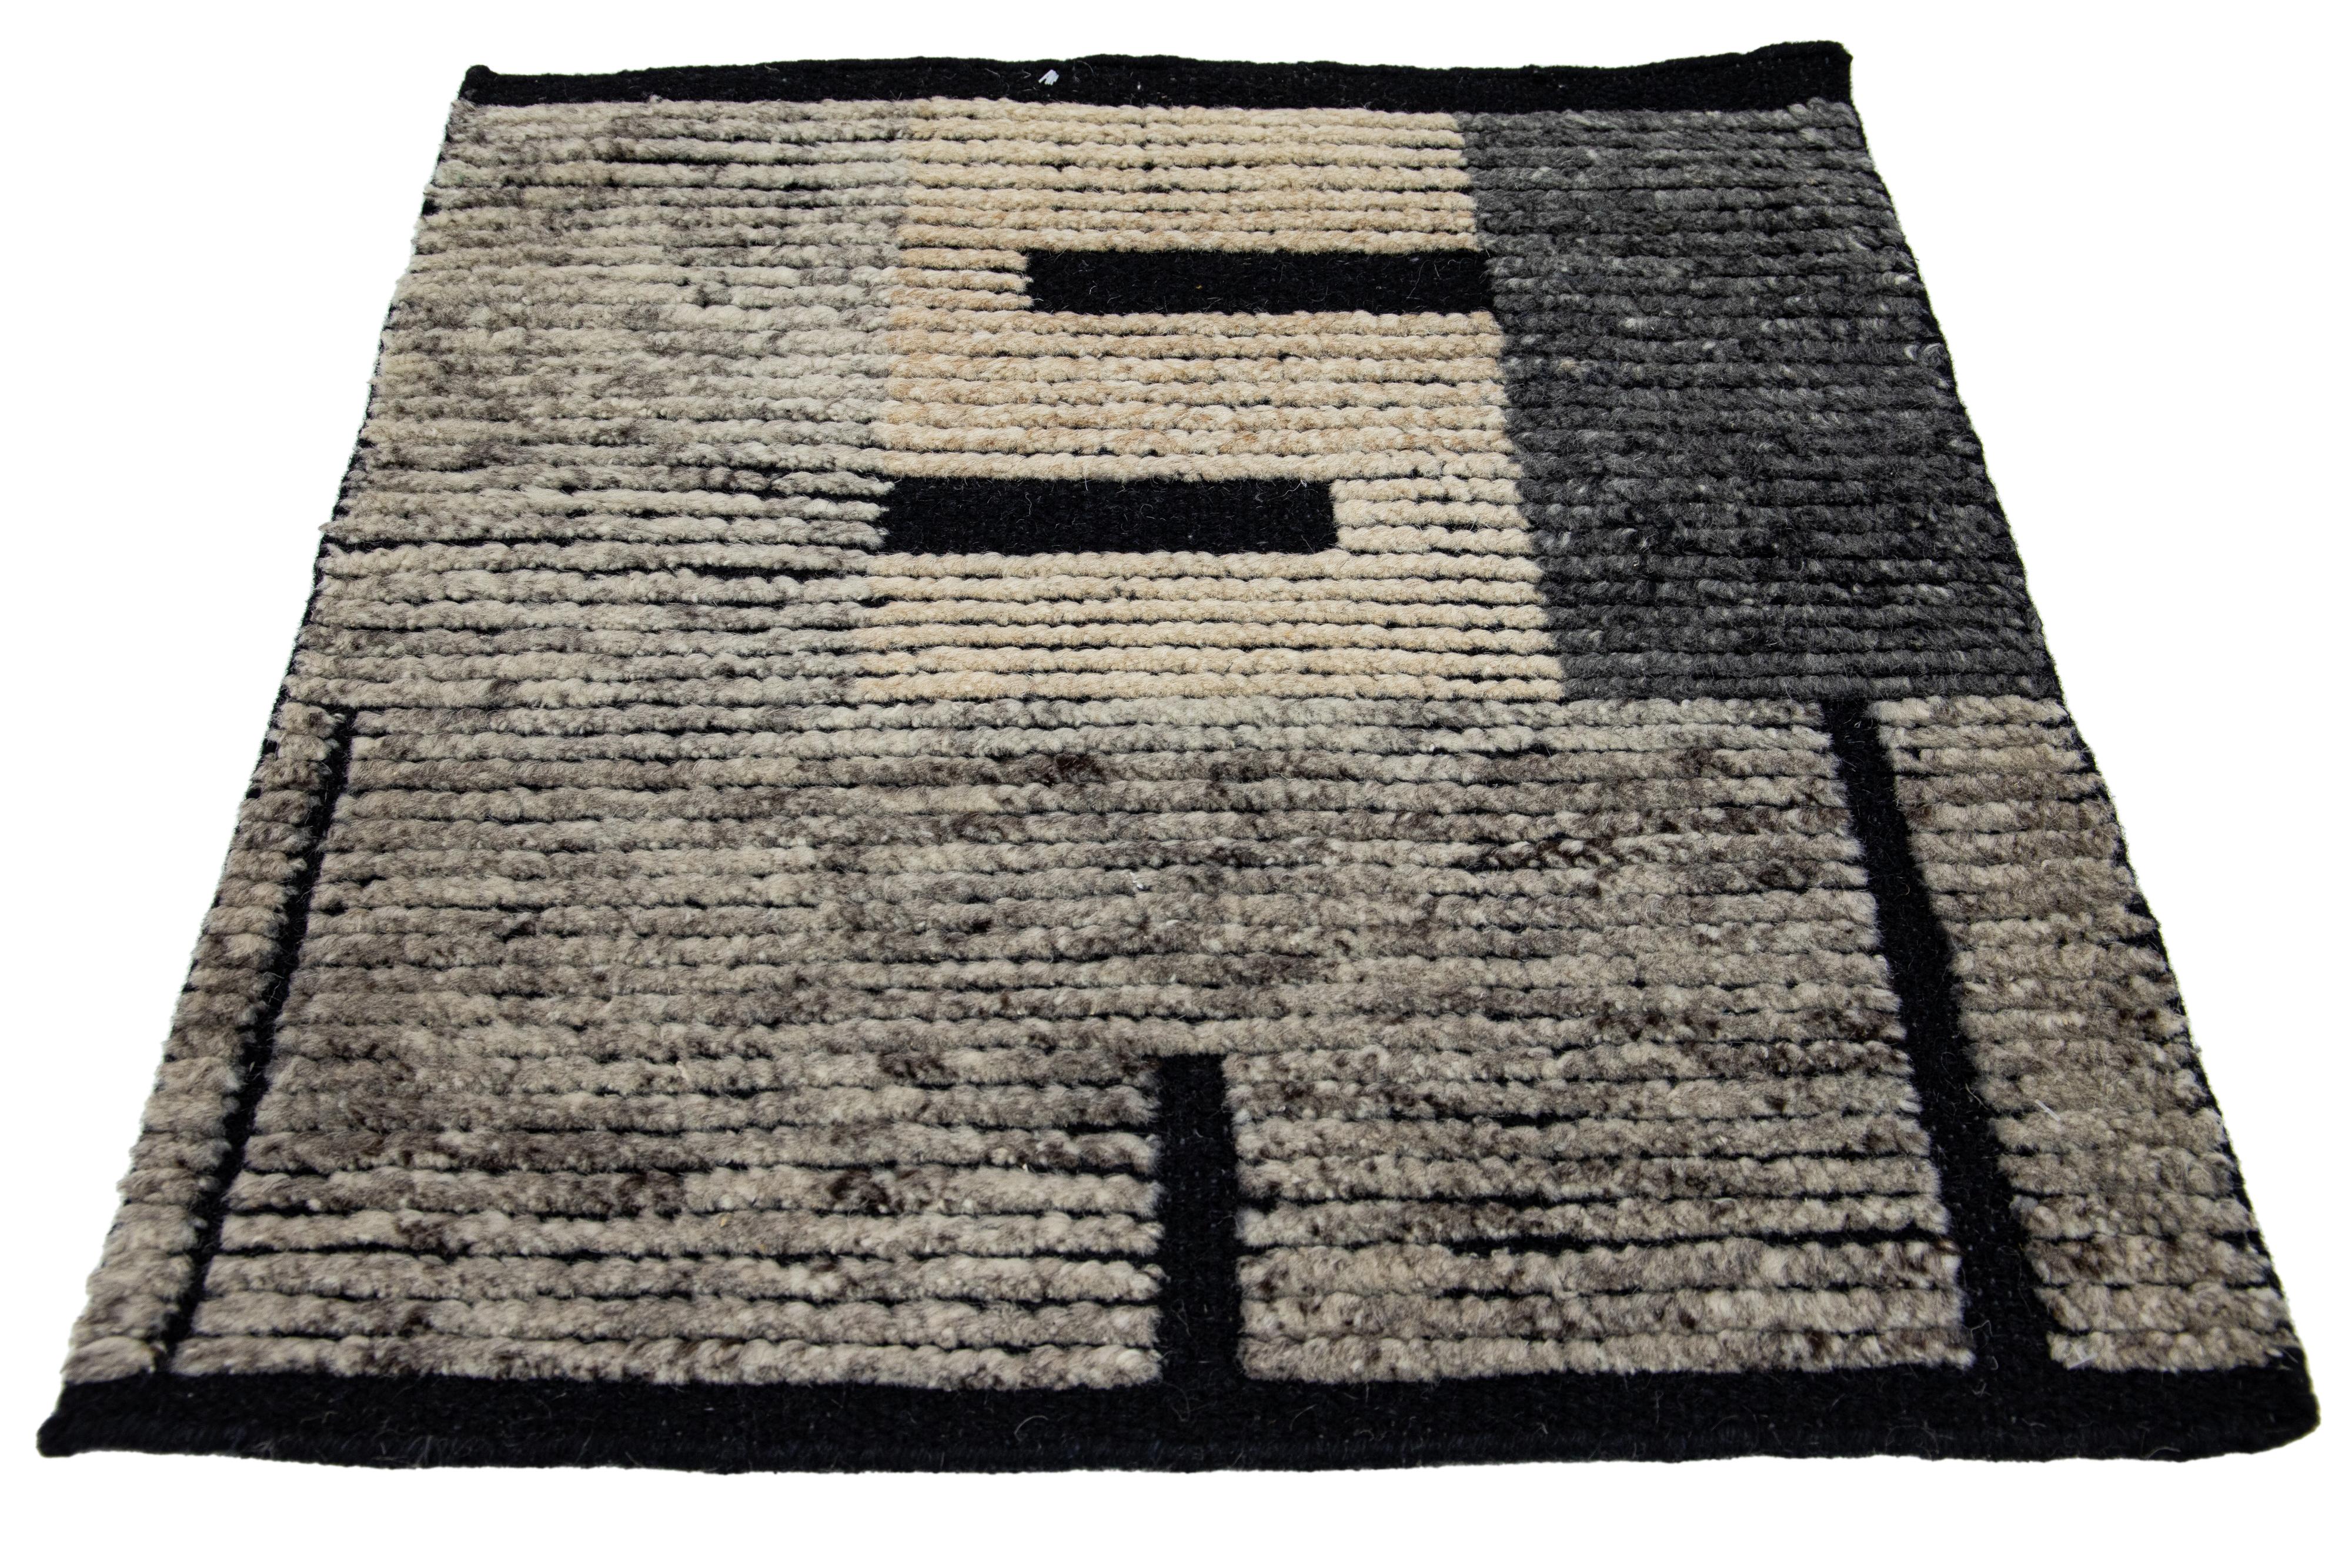 Apadana's Modern Moroccan Style wool custom rug. Custom sizes and colors made-to-order. 

Material: Wool 
Techniques: Hand-Knotted
Style: Moroccan 
Lead time: Approx. 15-16 wks available 
Colors: As shown, other custom colors are available.